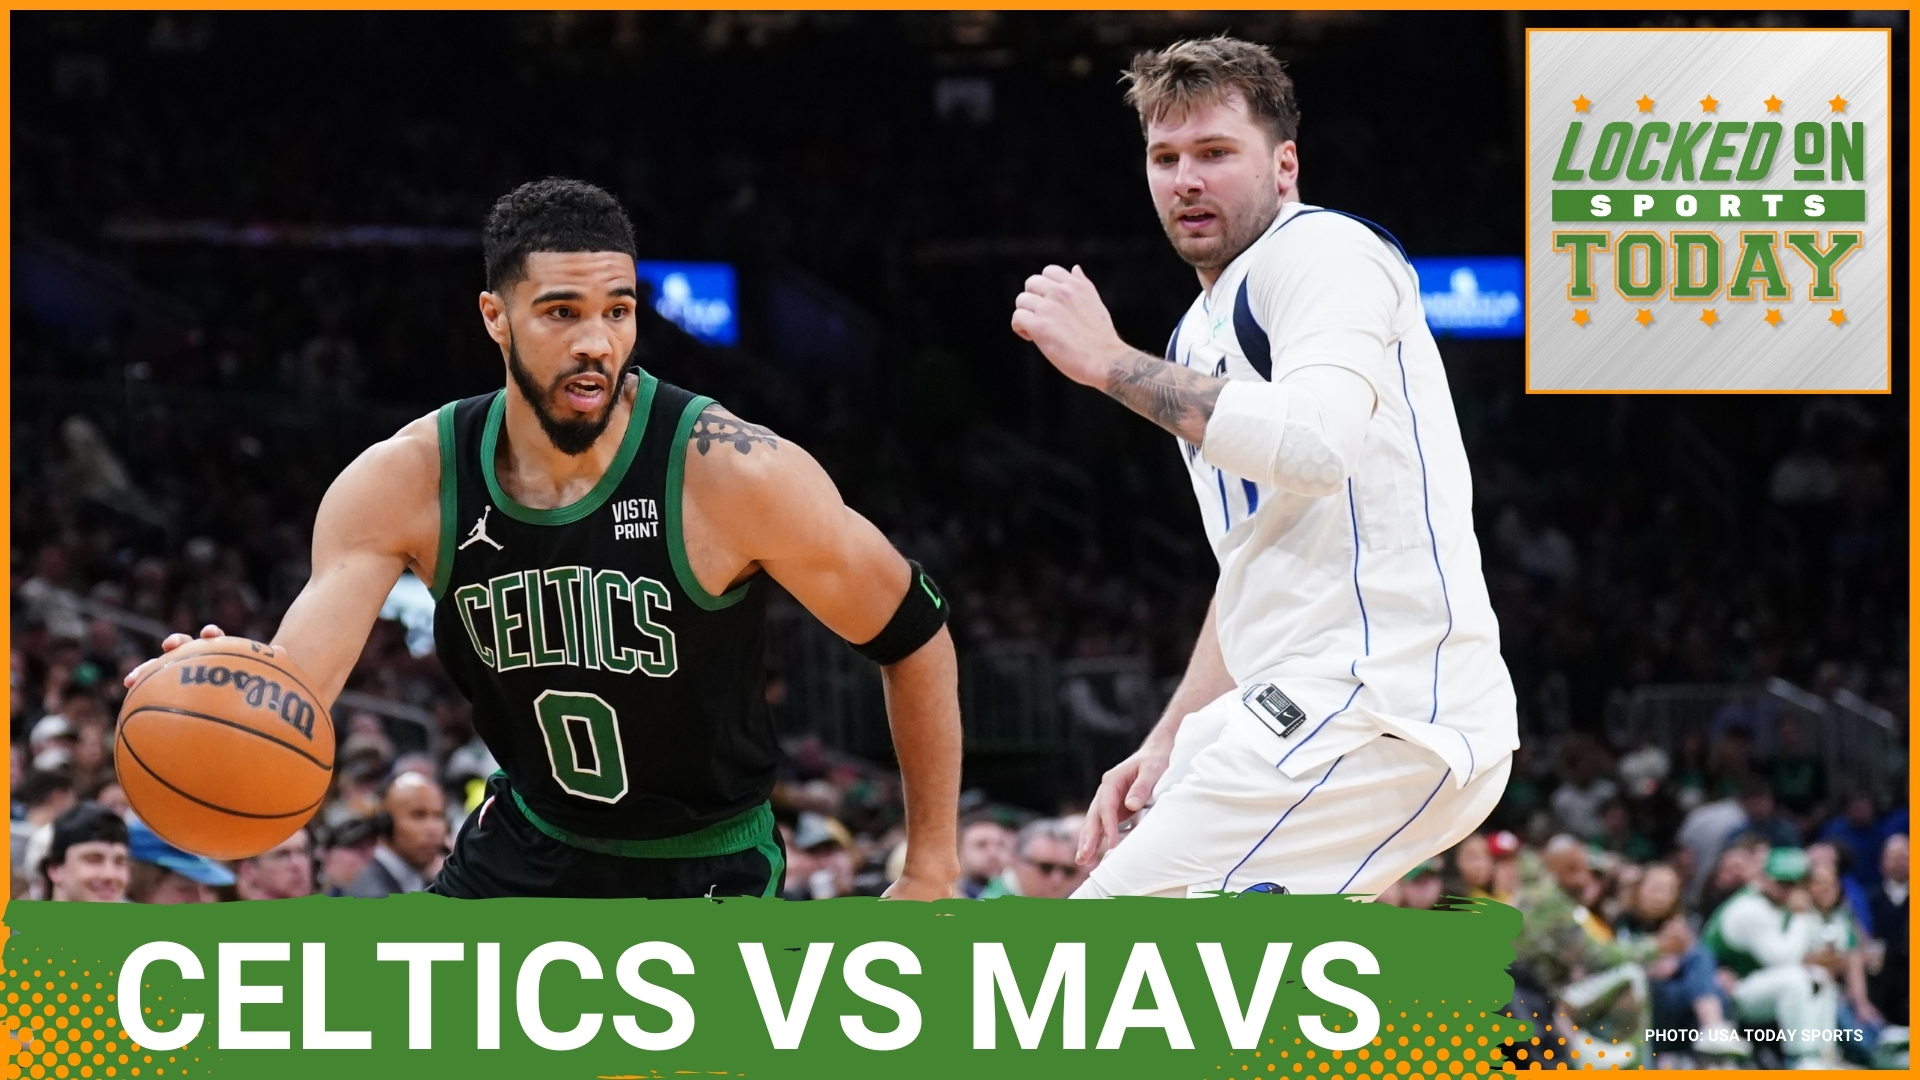 The Boston Celtics have the best team. The Dallas Mavericks have the best player and now they meet in the NBA Finals.